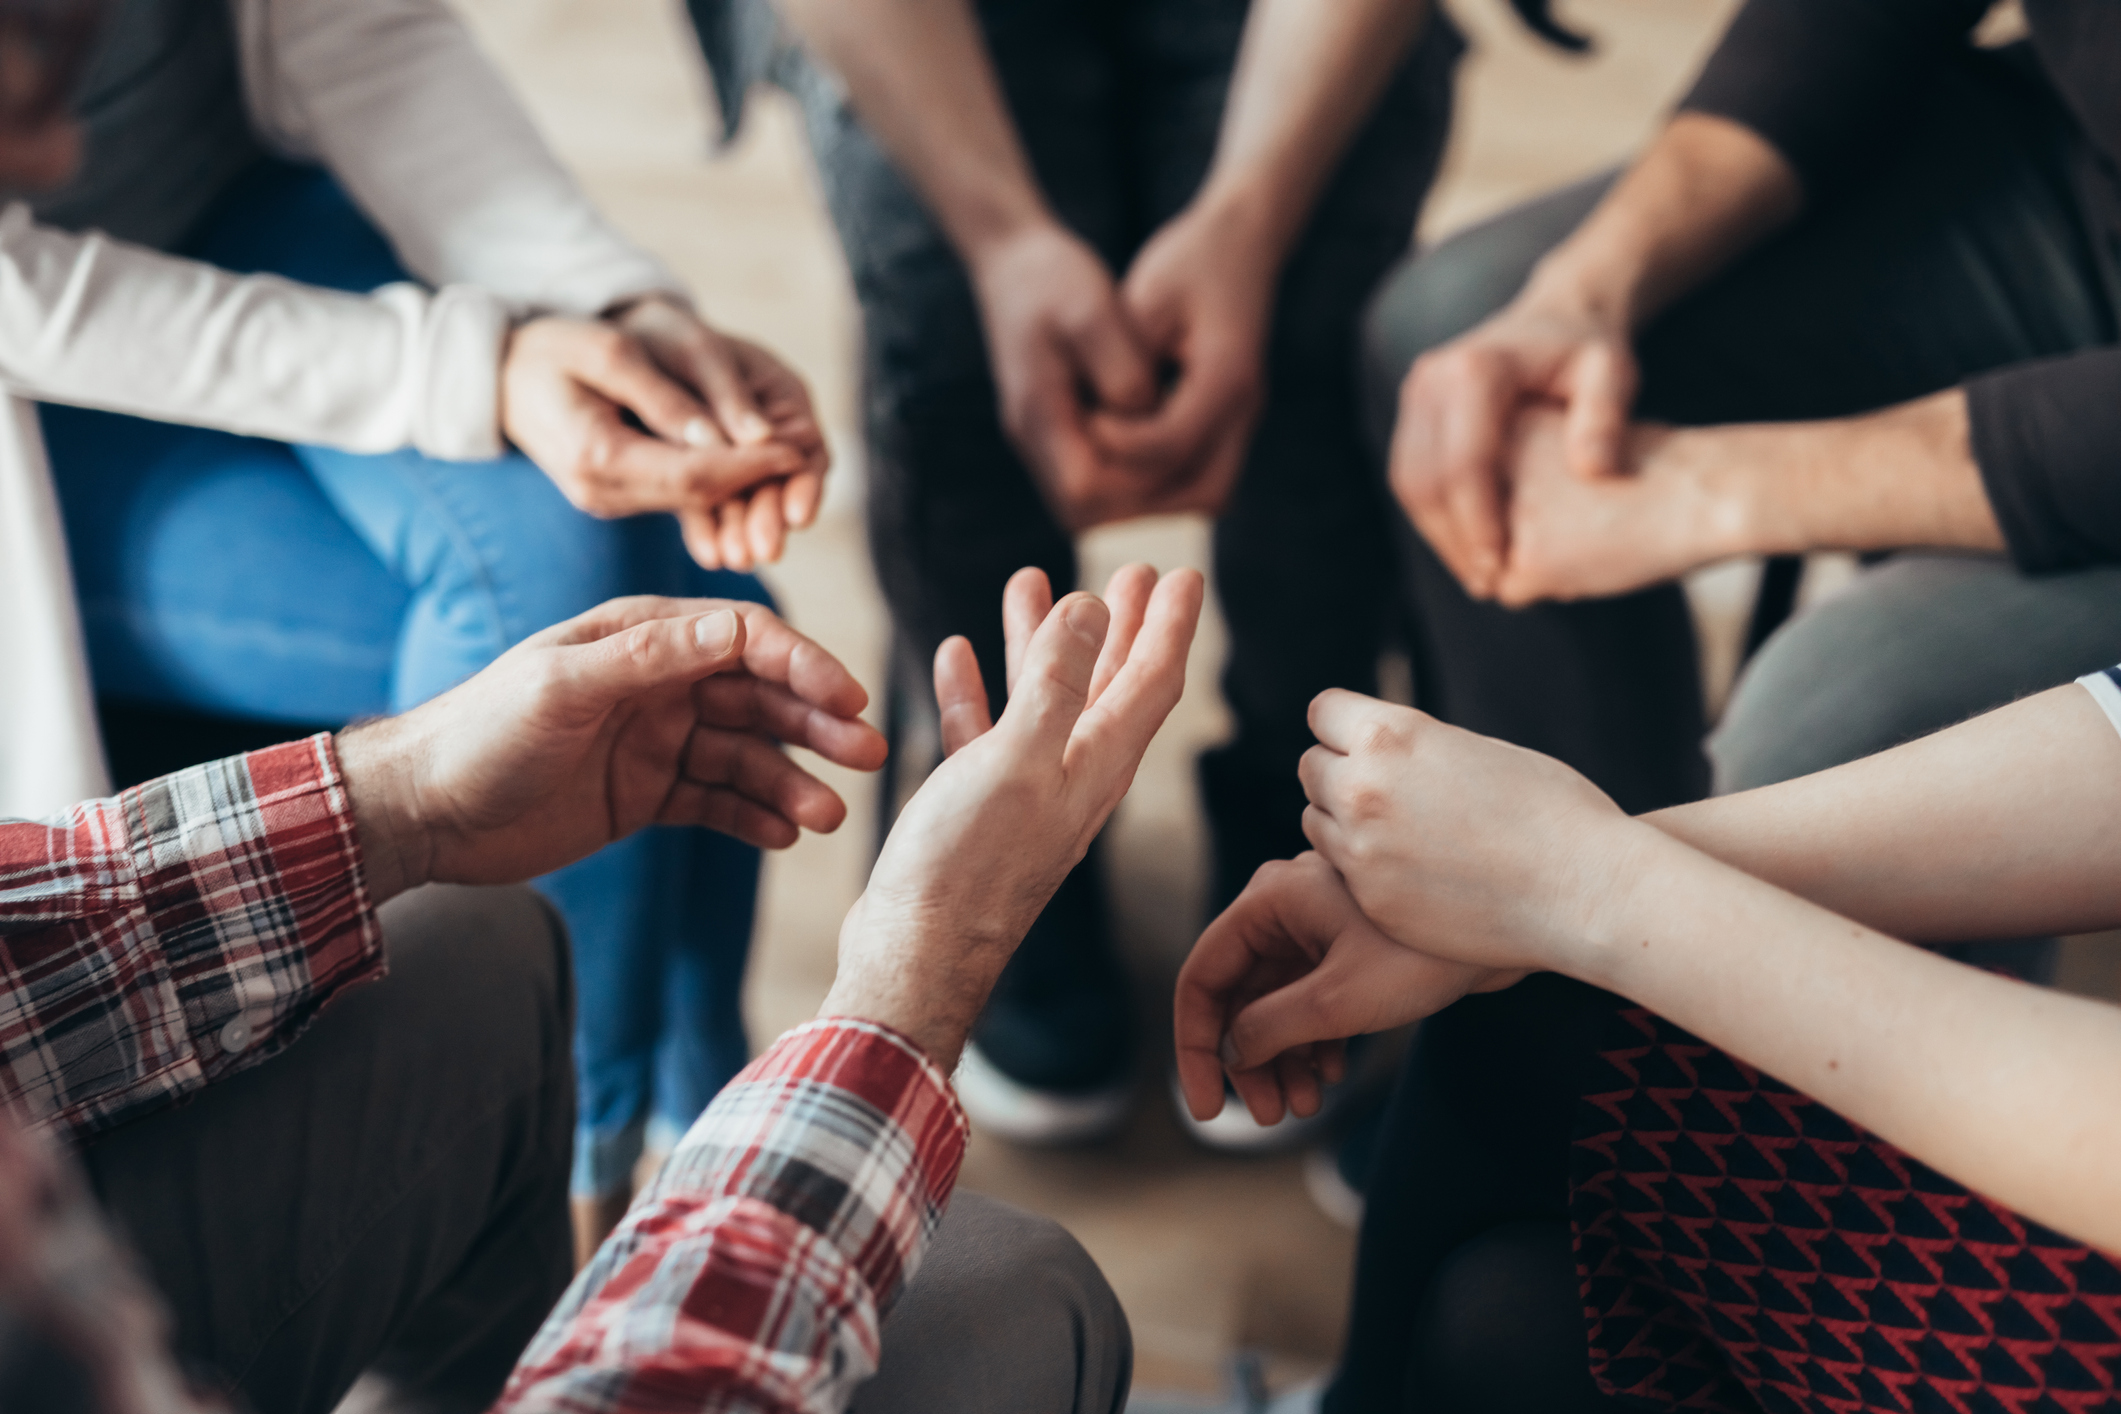 Picture shows the hands of a group of young adults sitting in a circle.